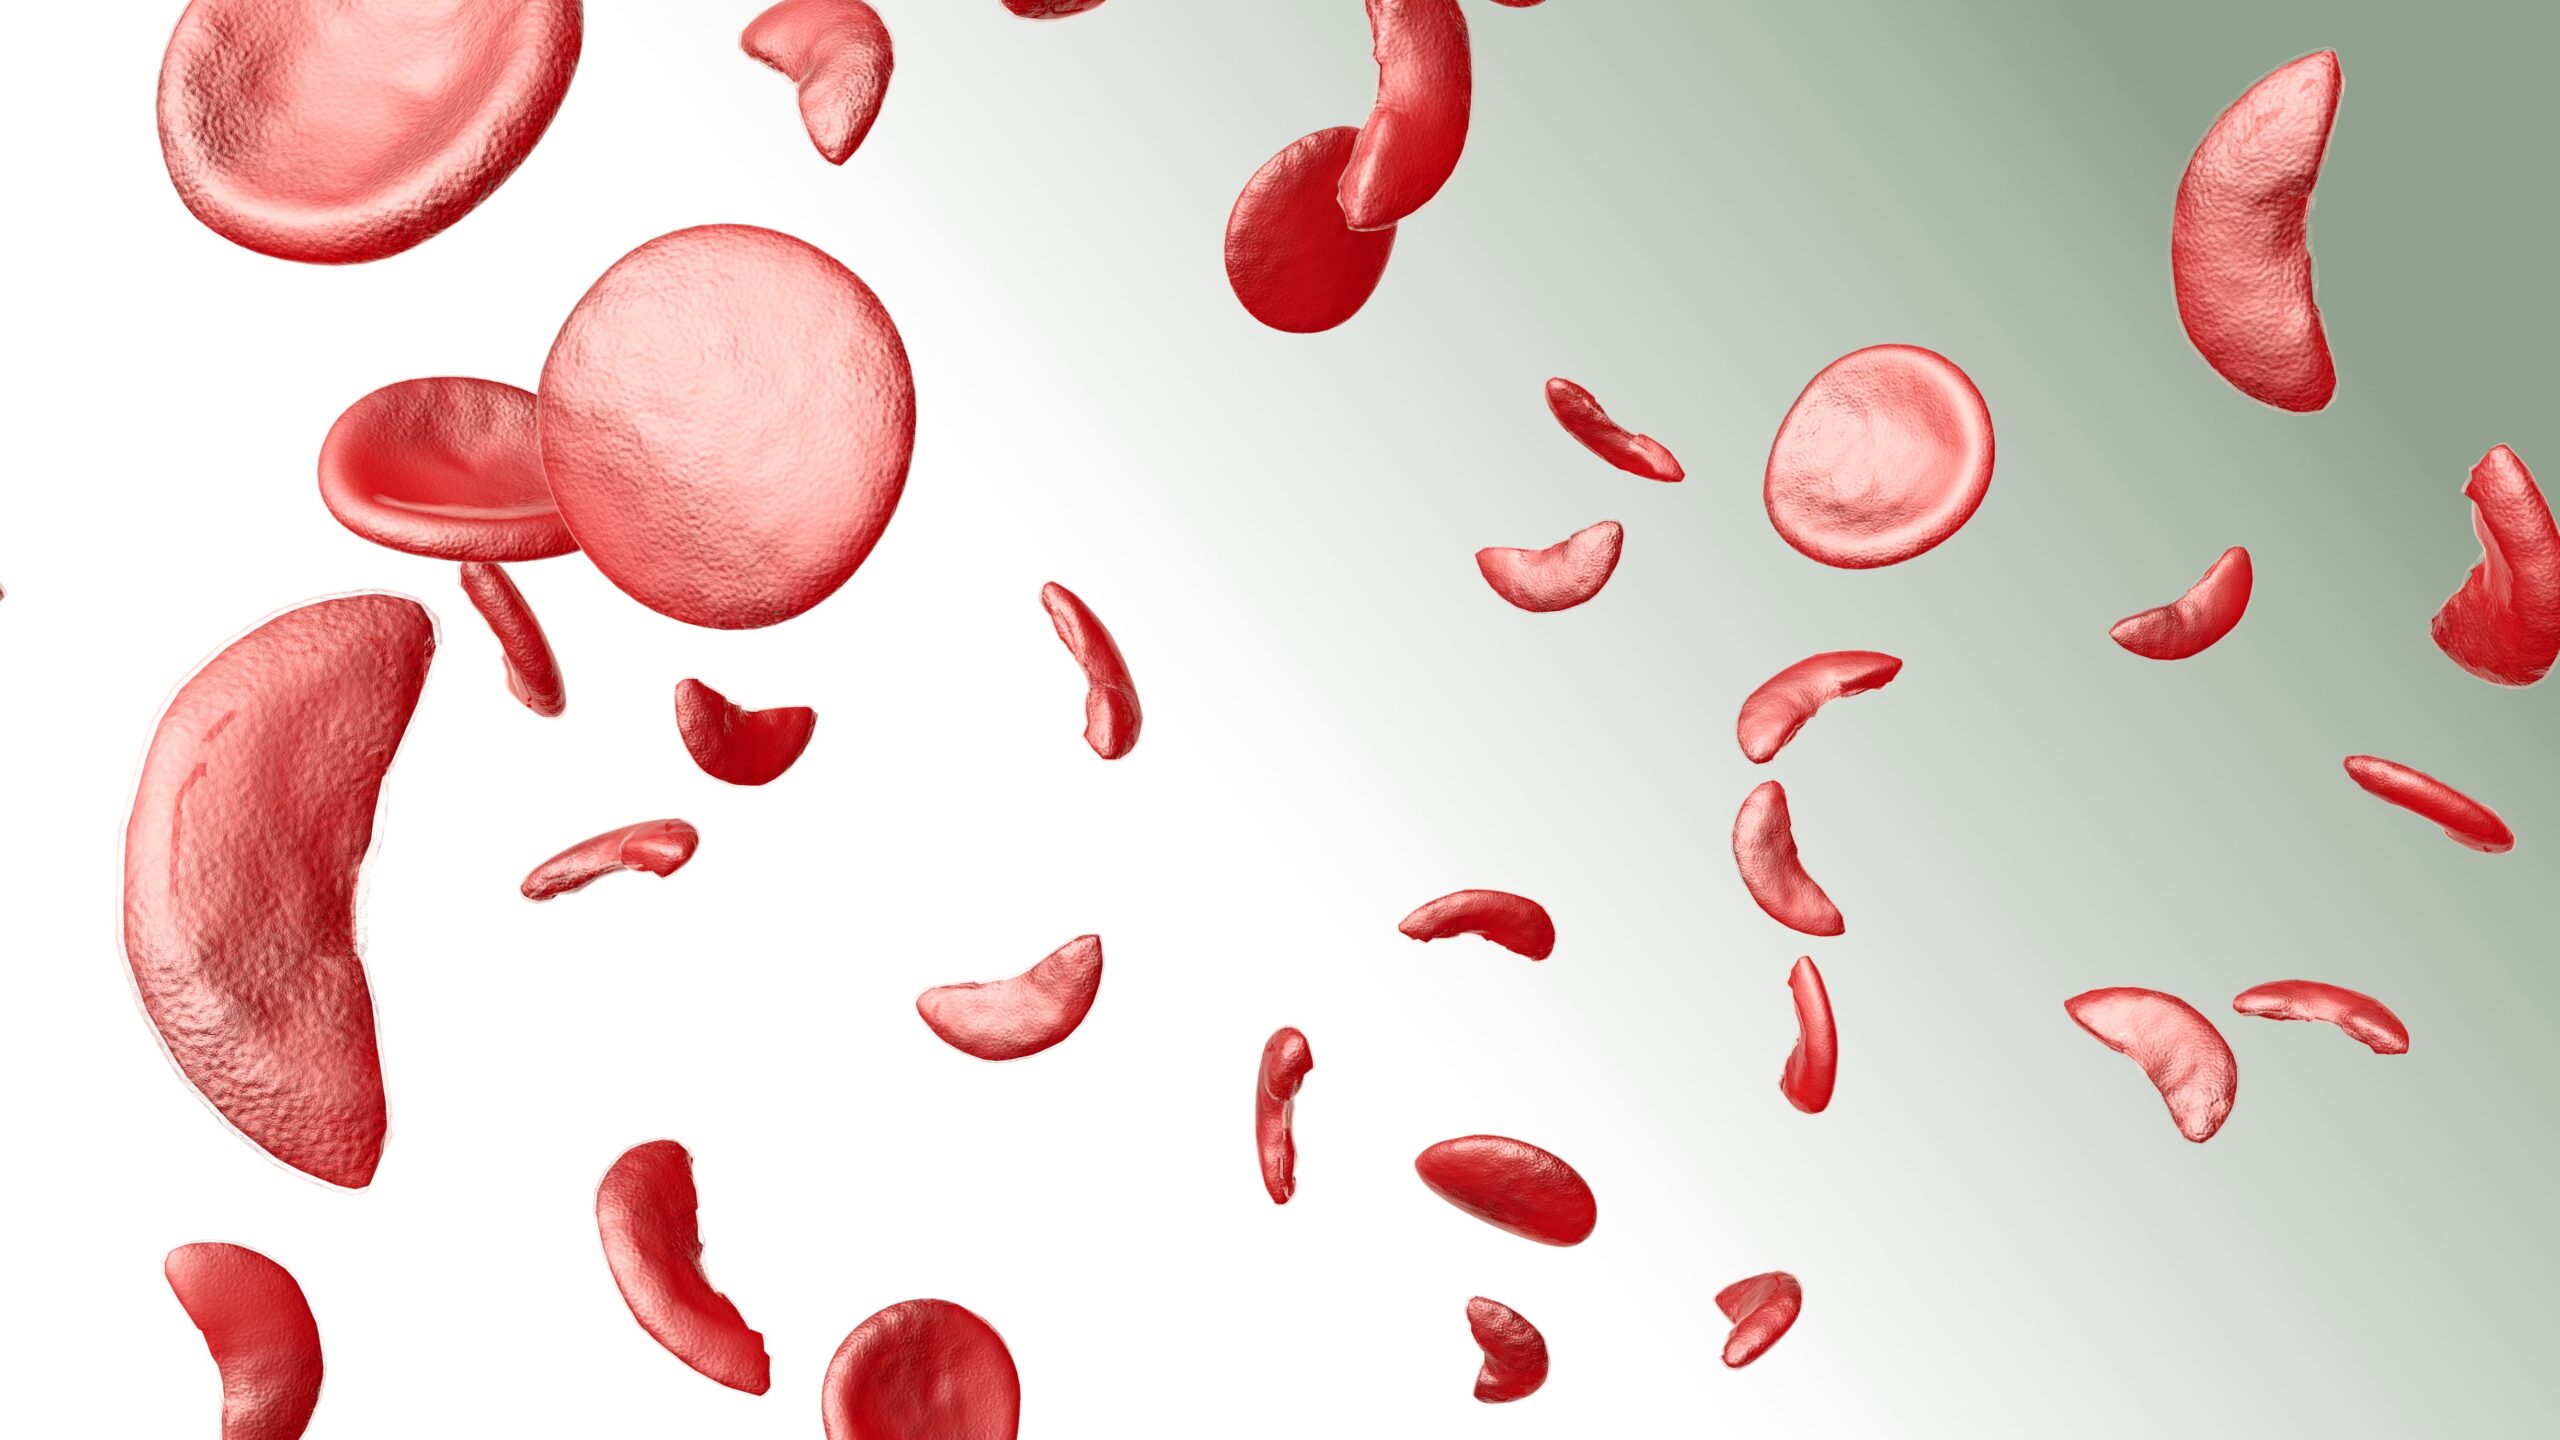 Oral Etavopivat Is Effective for Sickle Cell Disease Treatment in Phase I Study